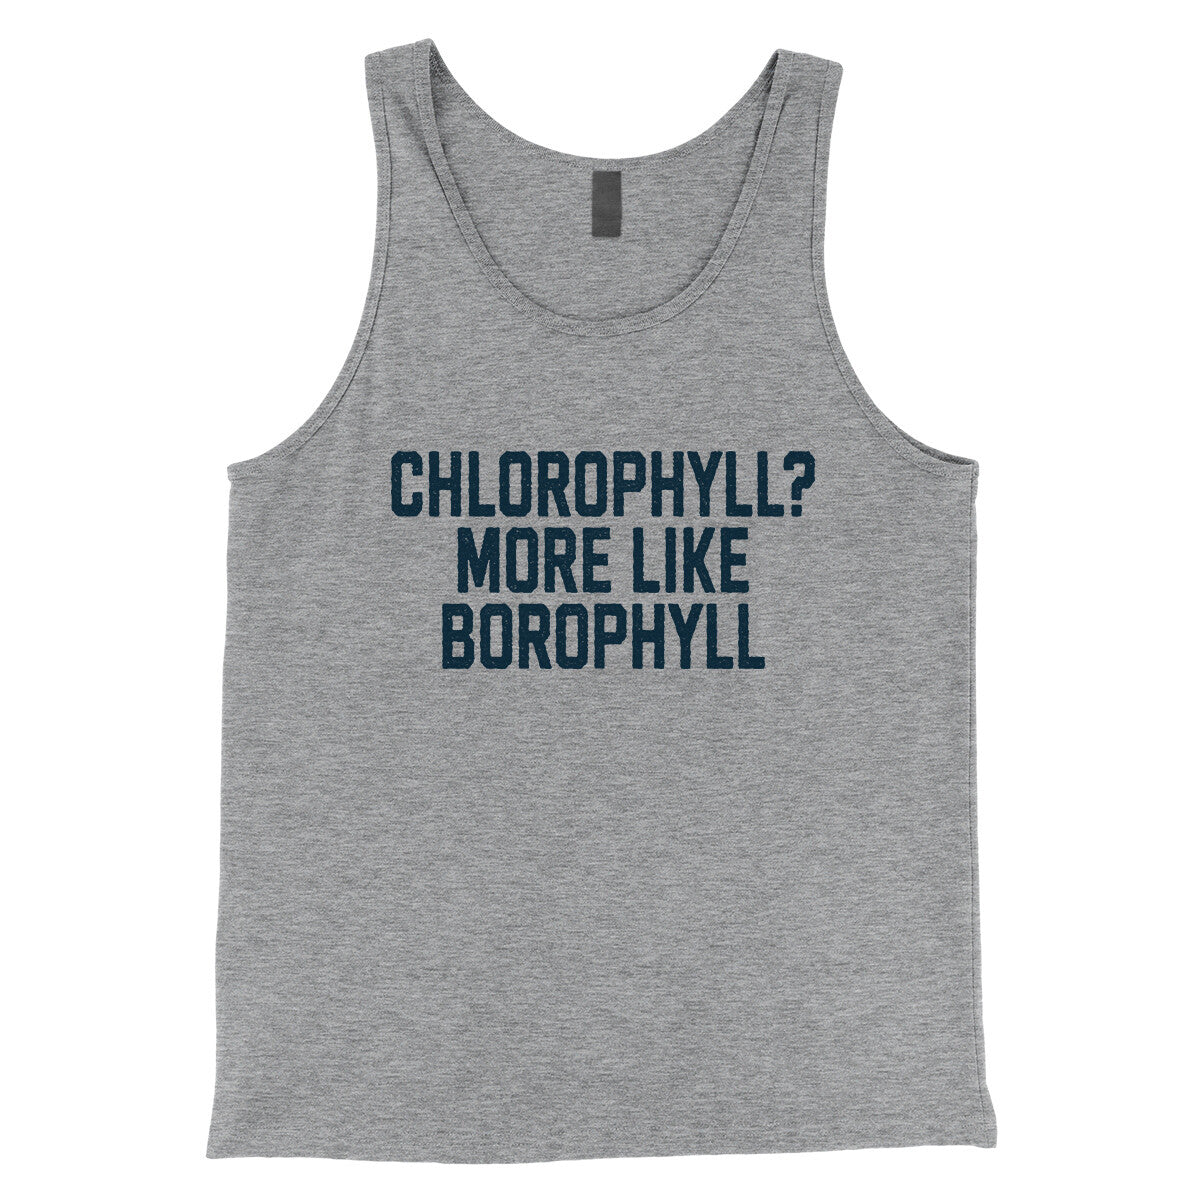 Chlorophyll More Like Borophyll in Athletic Heather Color